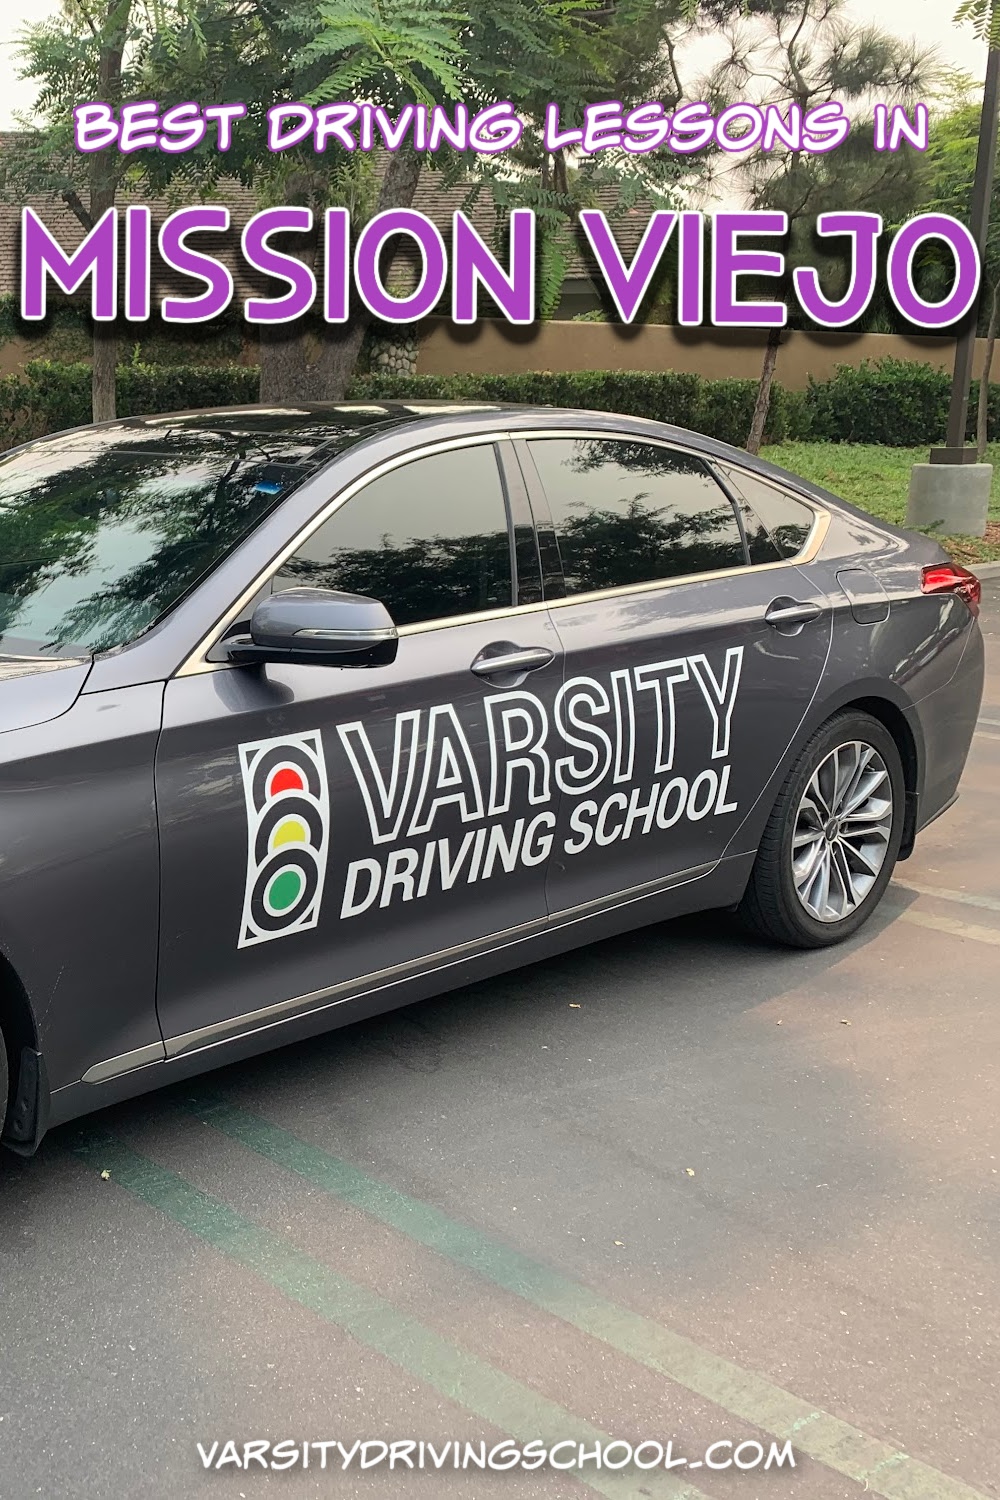 Varsity Driving School is where students will find the best driving lessons in Mission Viejo, covering everything from the basics to defensive driving.